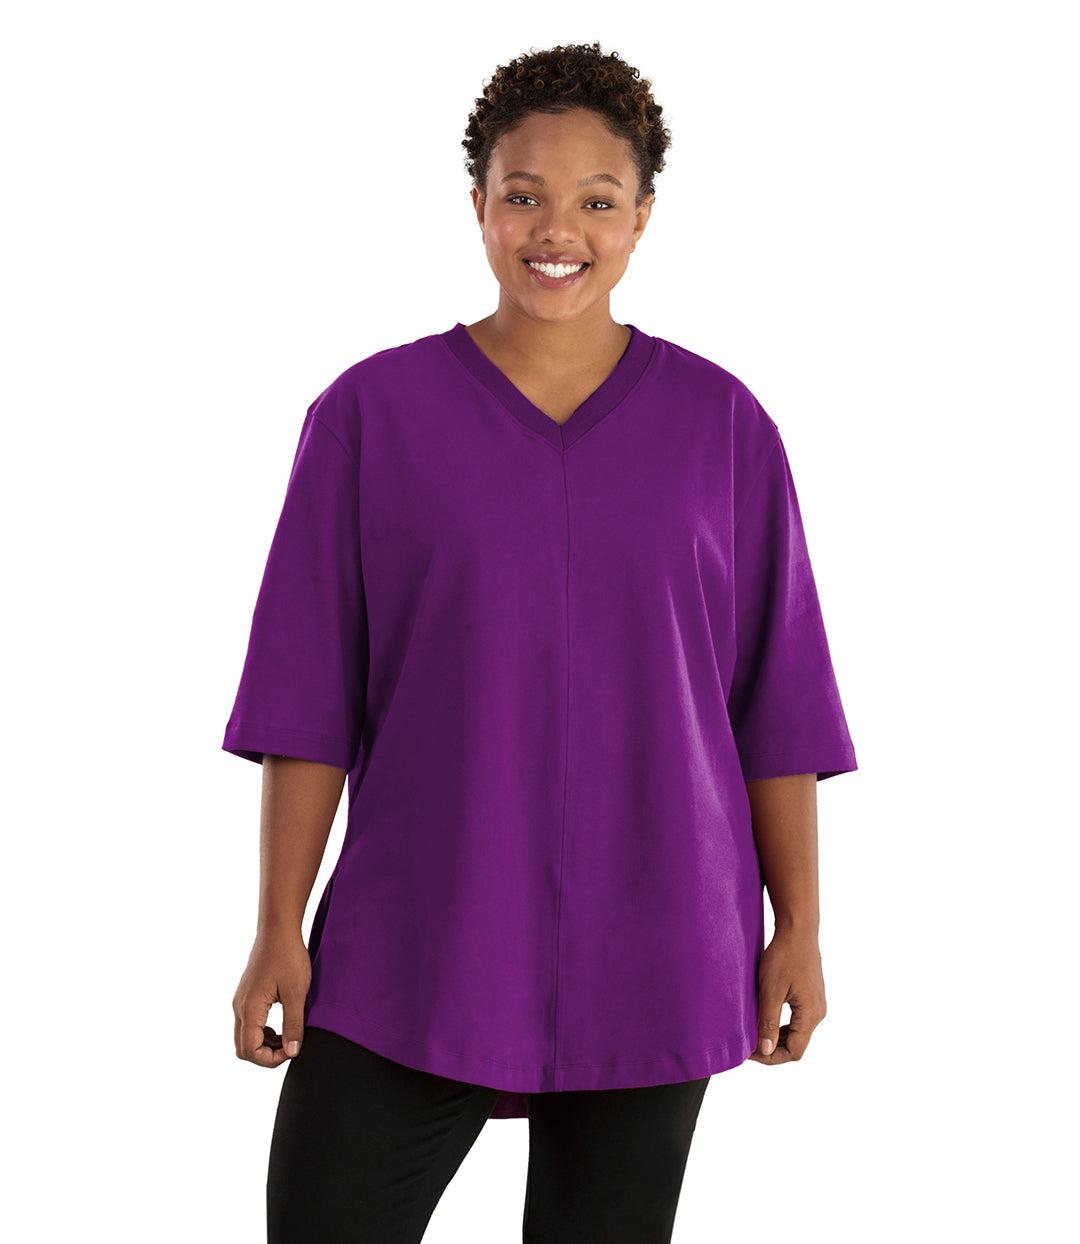 Plus size woman, facing front, wearing JunoActive plus size Legacy Cotton Casual Tunic in the color Heliotrope Purple. She is wearing JunoActive Plus Size Leggings in the color black.